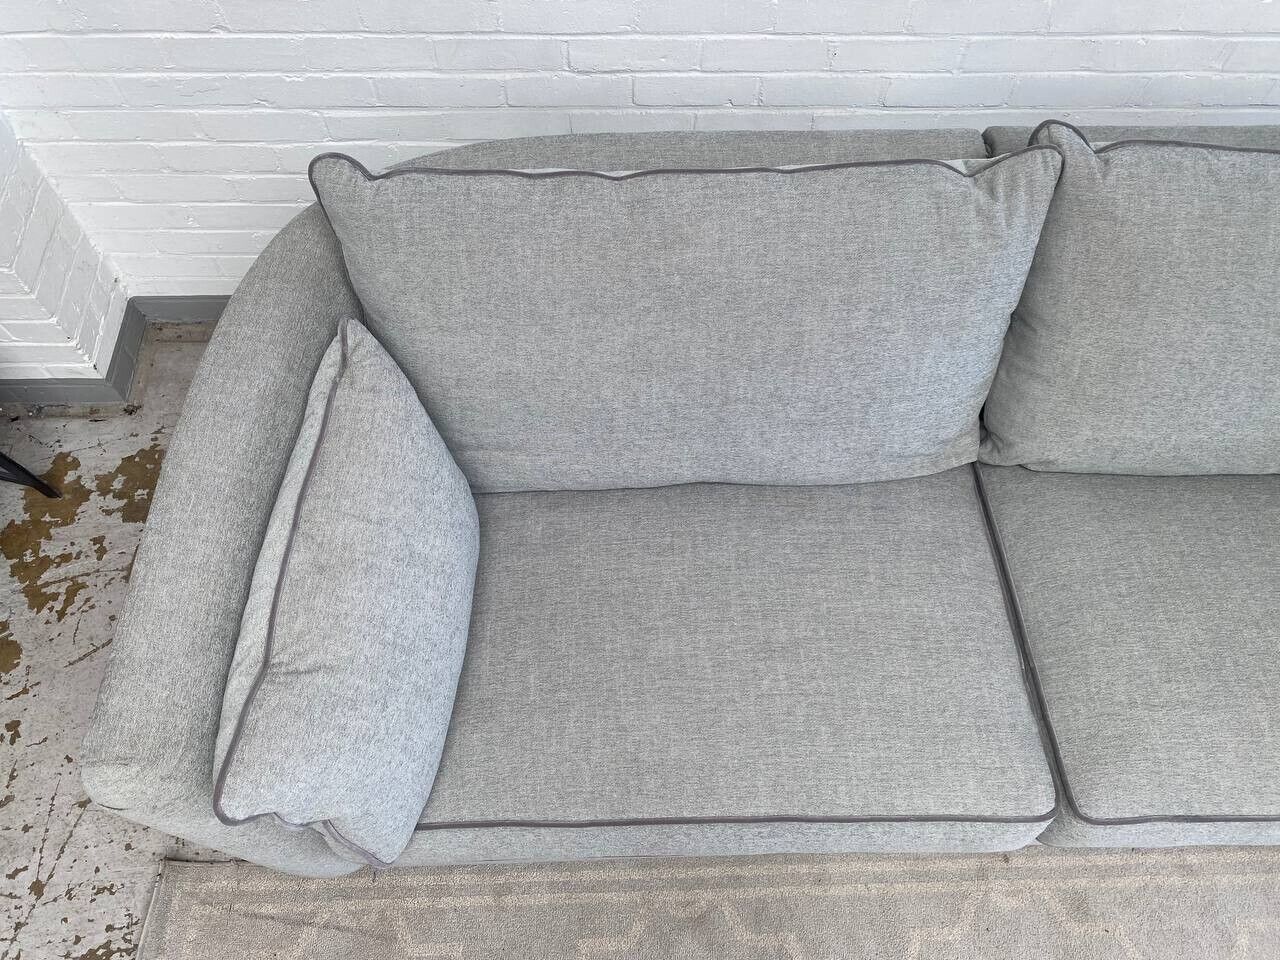 Collins and Hayes maple grand grey sofa